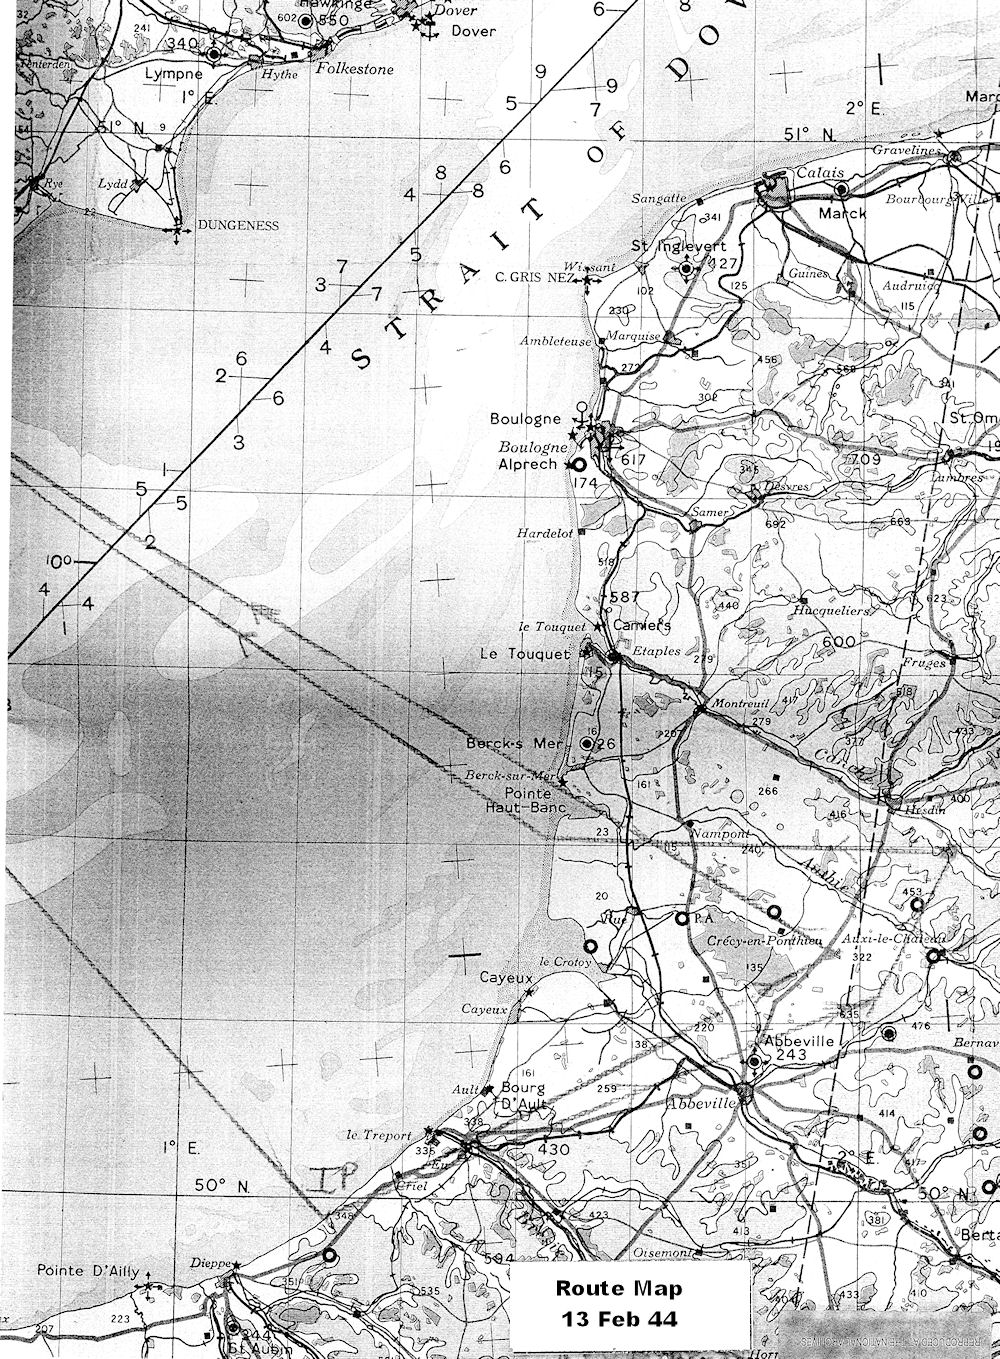 Route Map 13Feb44